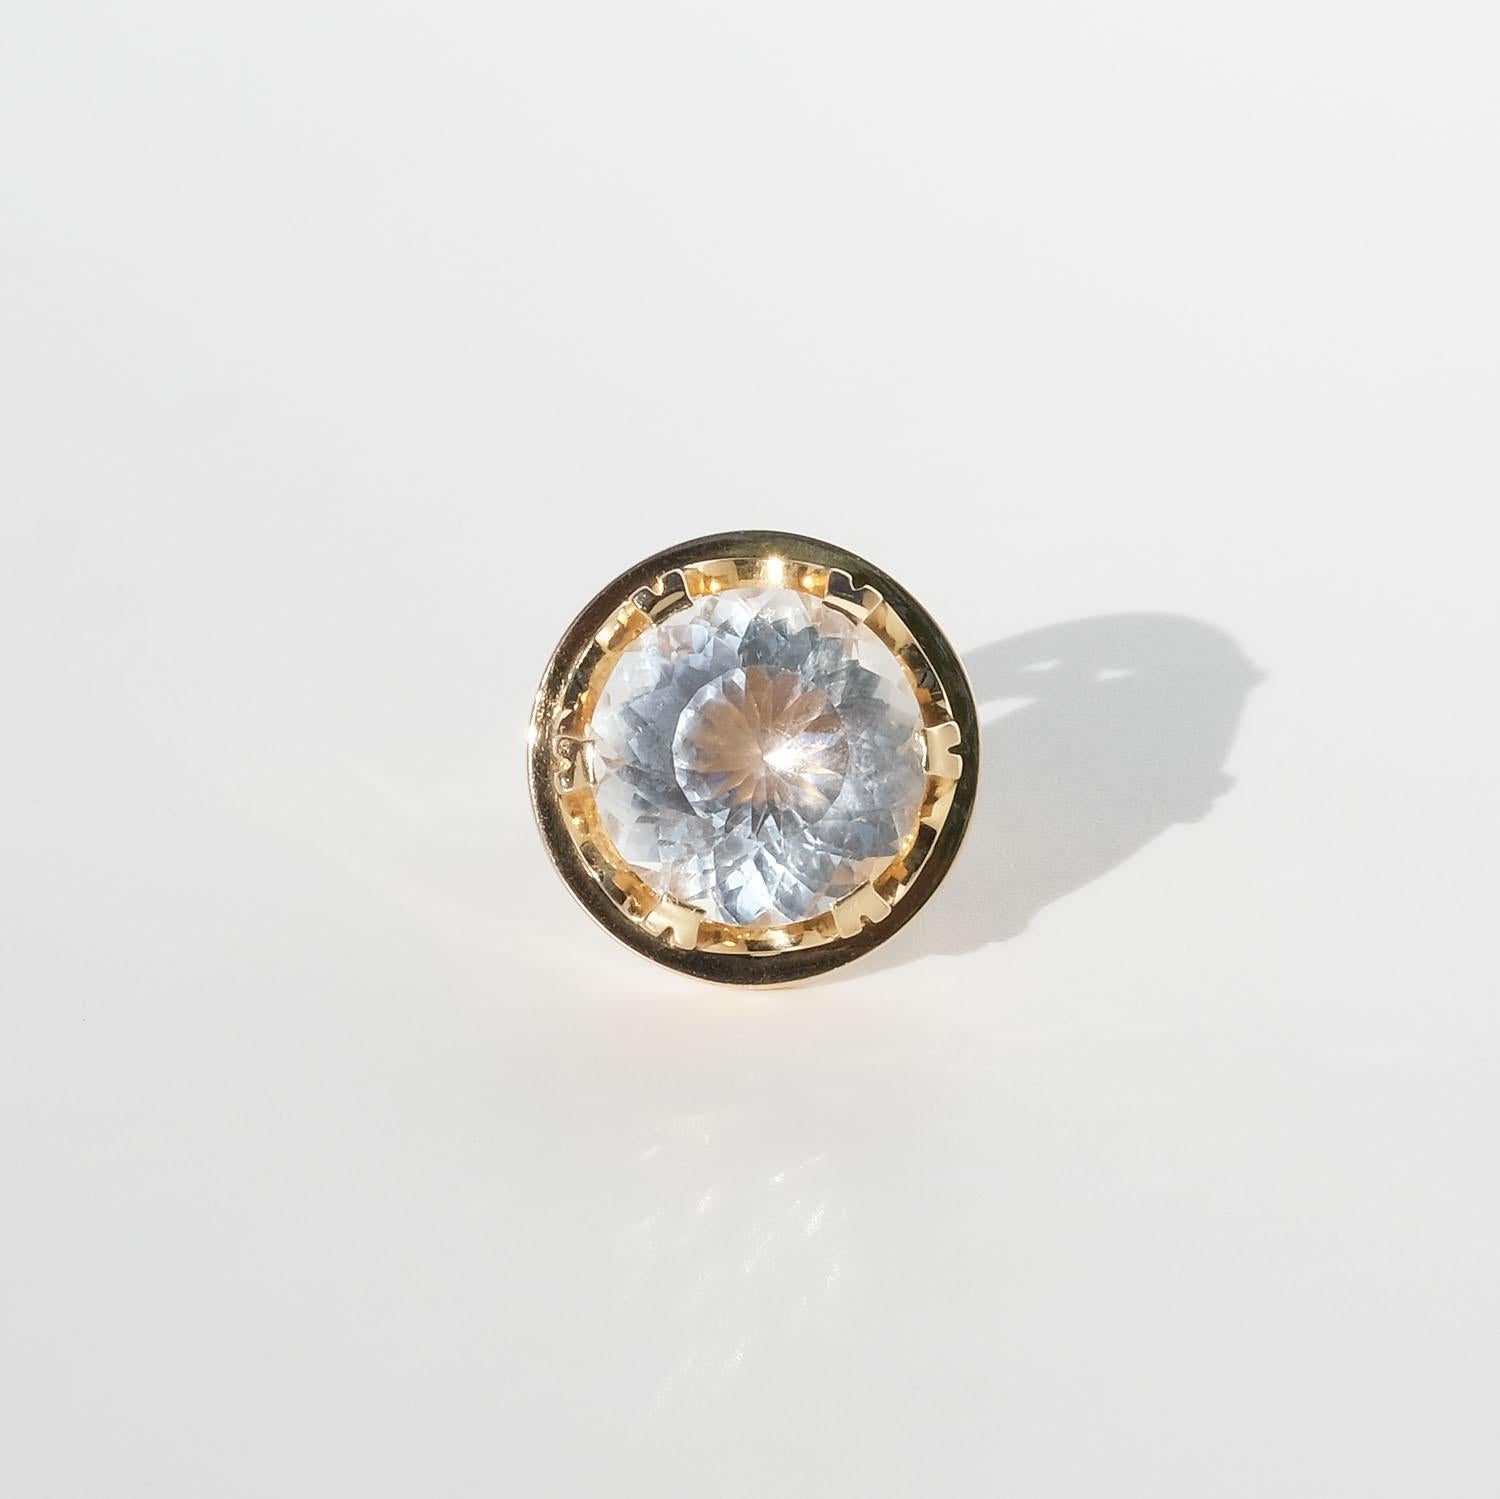 Vintage 18k Gold and Rock Crystal Ring by Finnish Master Kaunis Koru In Good Condition For Sale In Stockholm, SE